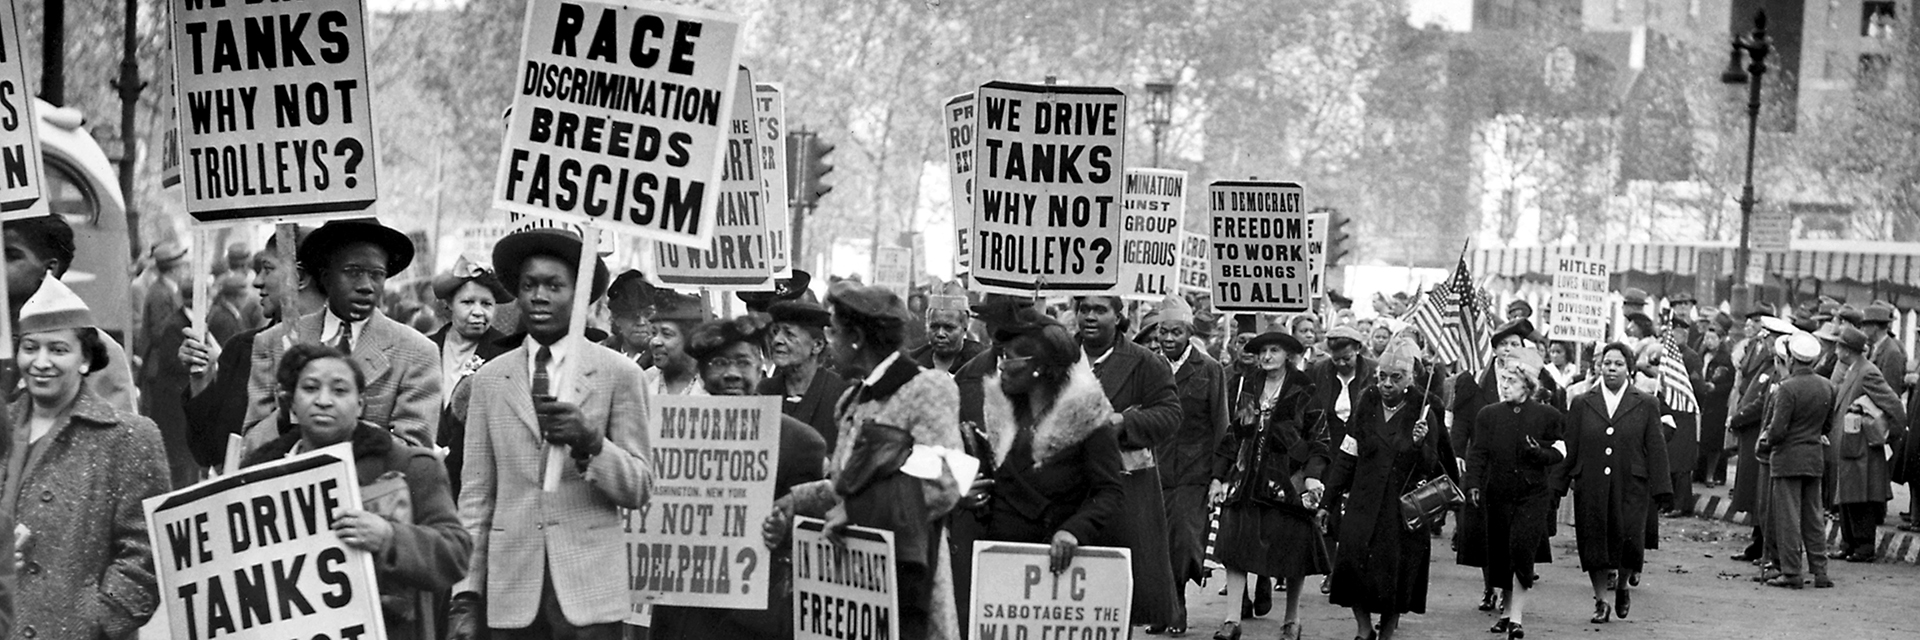 PTC Protest, November 8, 1943, 1943. (John W. Mosley Photograph Collection, Charles L. Blockson Afro-American Collection, Temple University Libraries, Philadelphia, PA.)